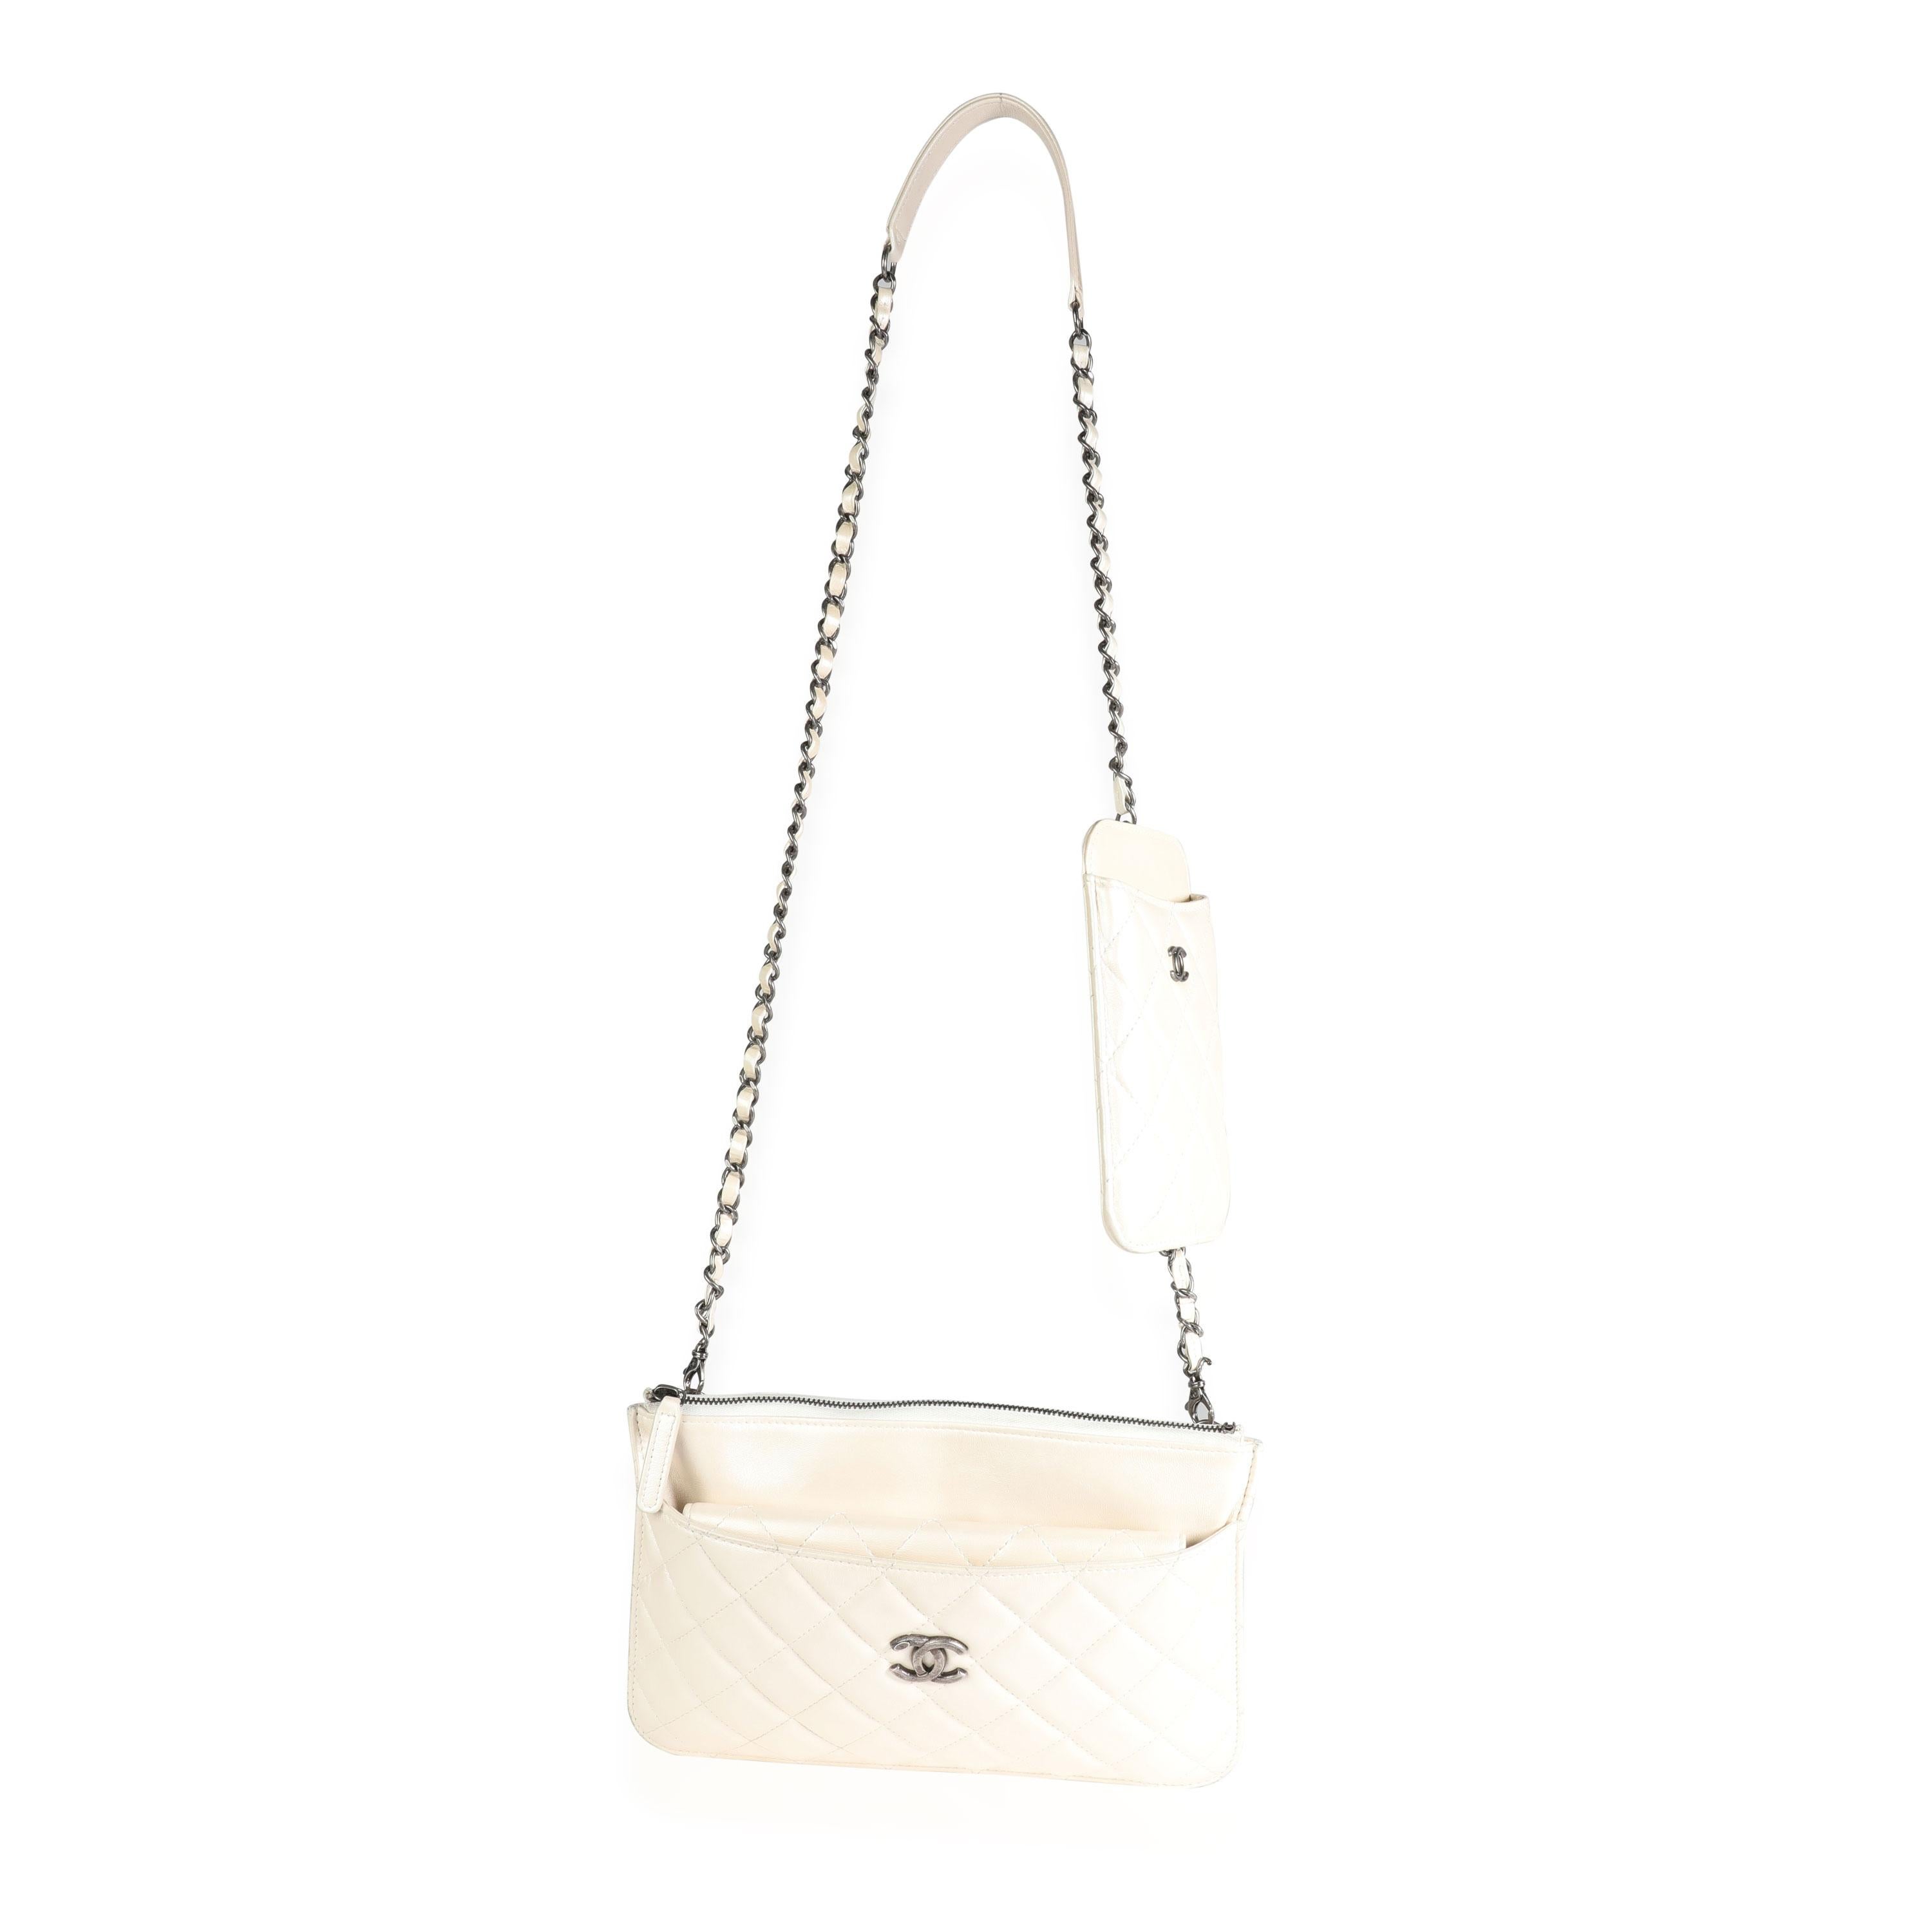 Listing Title: Chanel Ivory Quilted Lambskin Bag In A Bag
SKU: 117442
Condition: Pre-owned (3000)
Handbag Condition: Very Good
Condition Comments: Very Good Condition. Wear to corners. Fleabites to exterior. Faint scuffing throughout.
Brand: